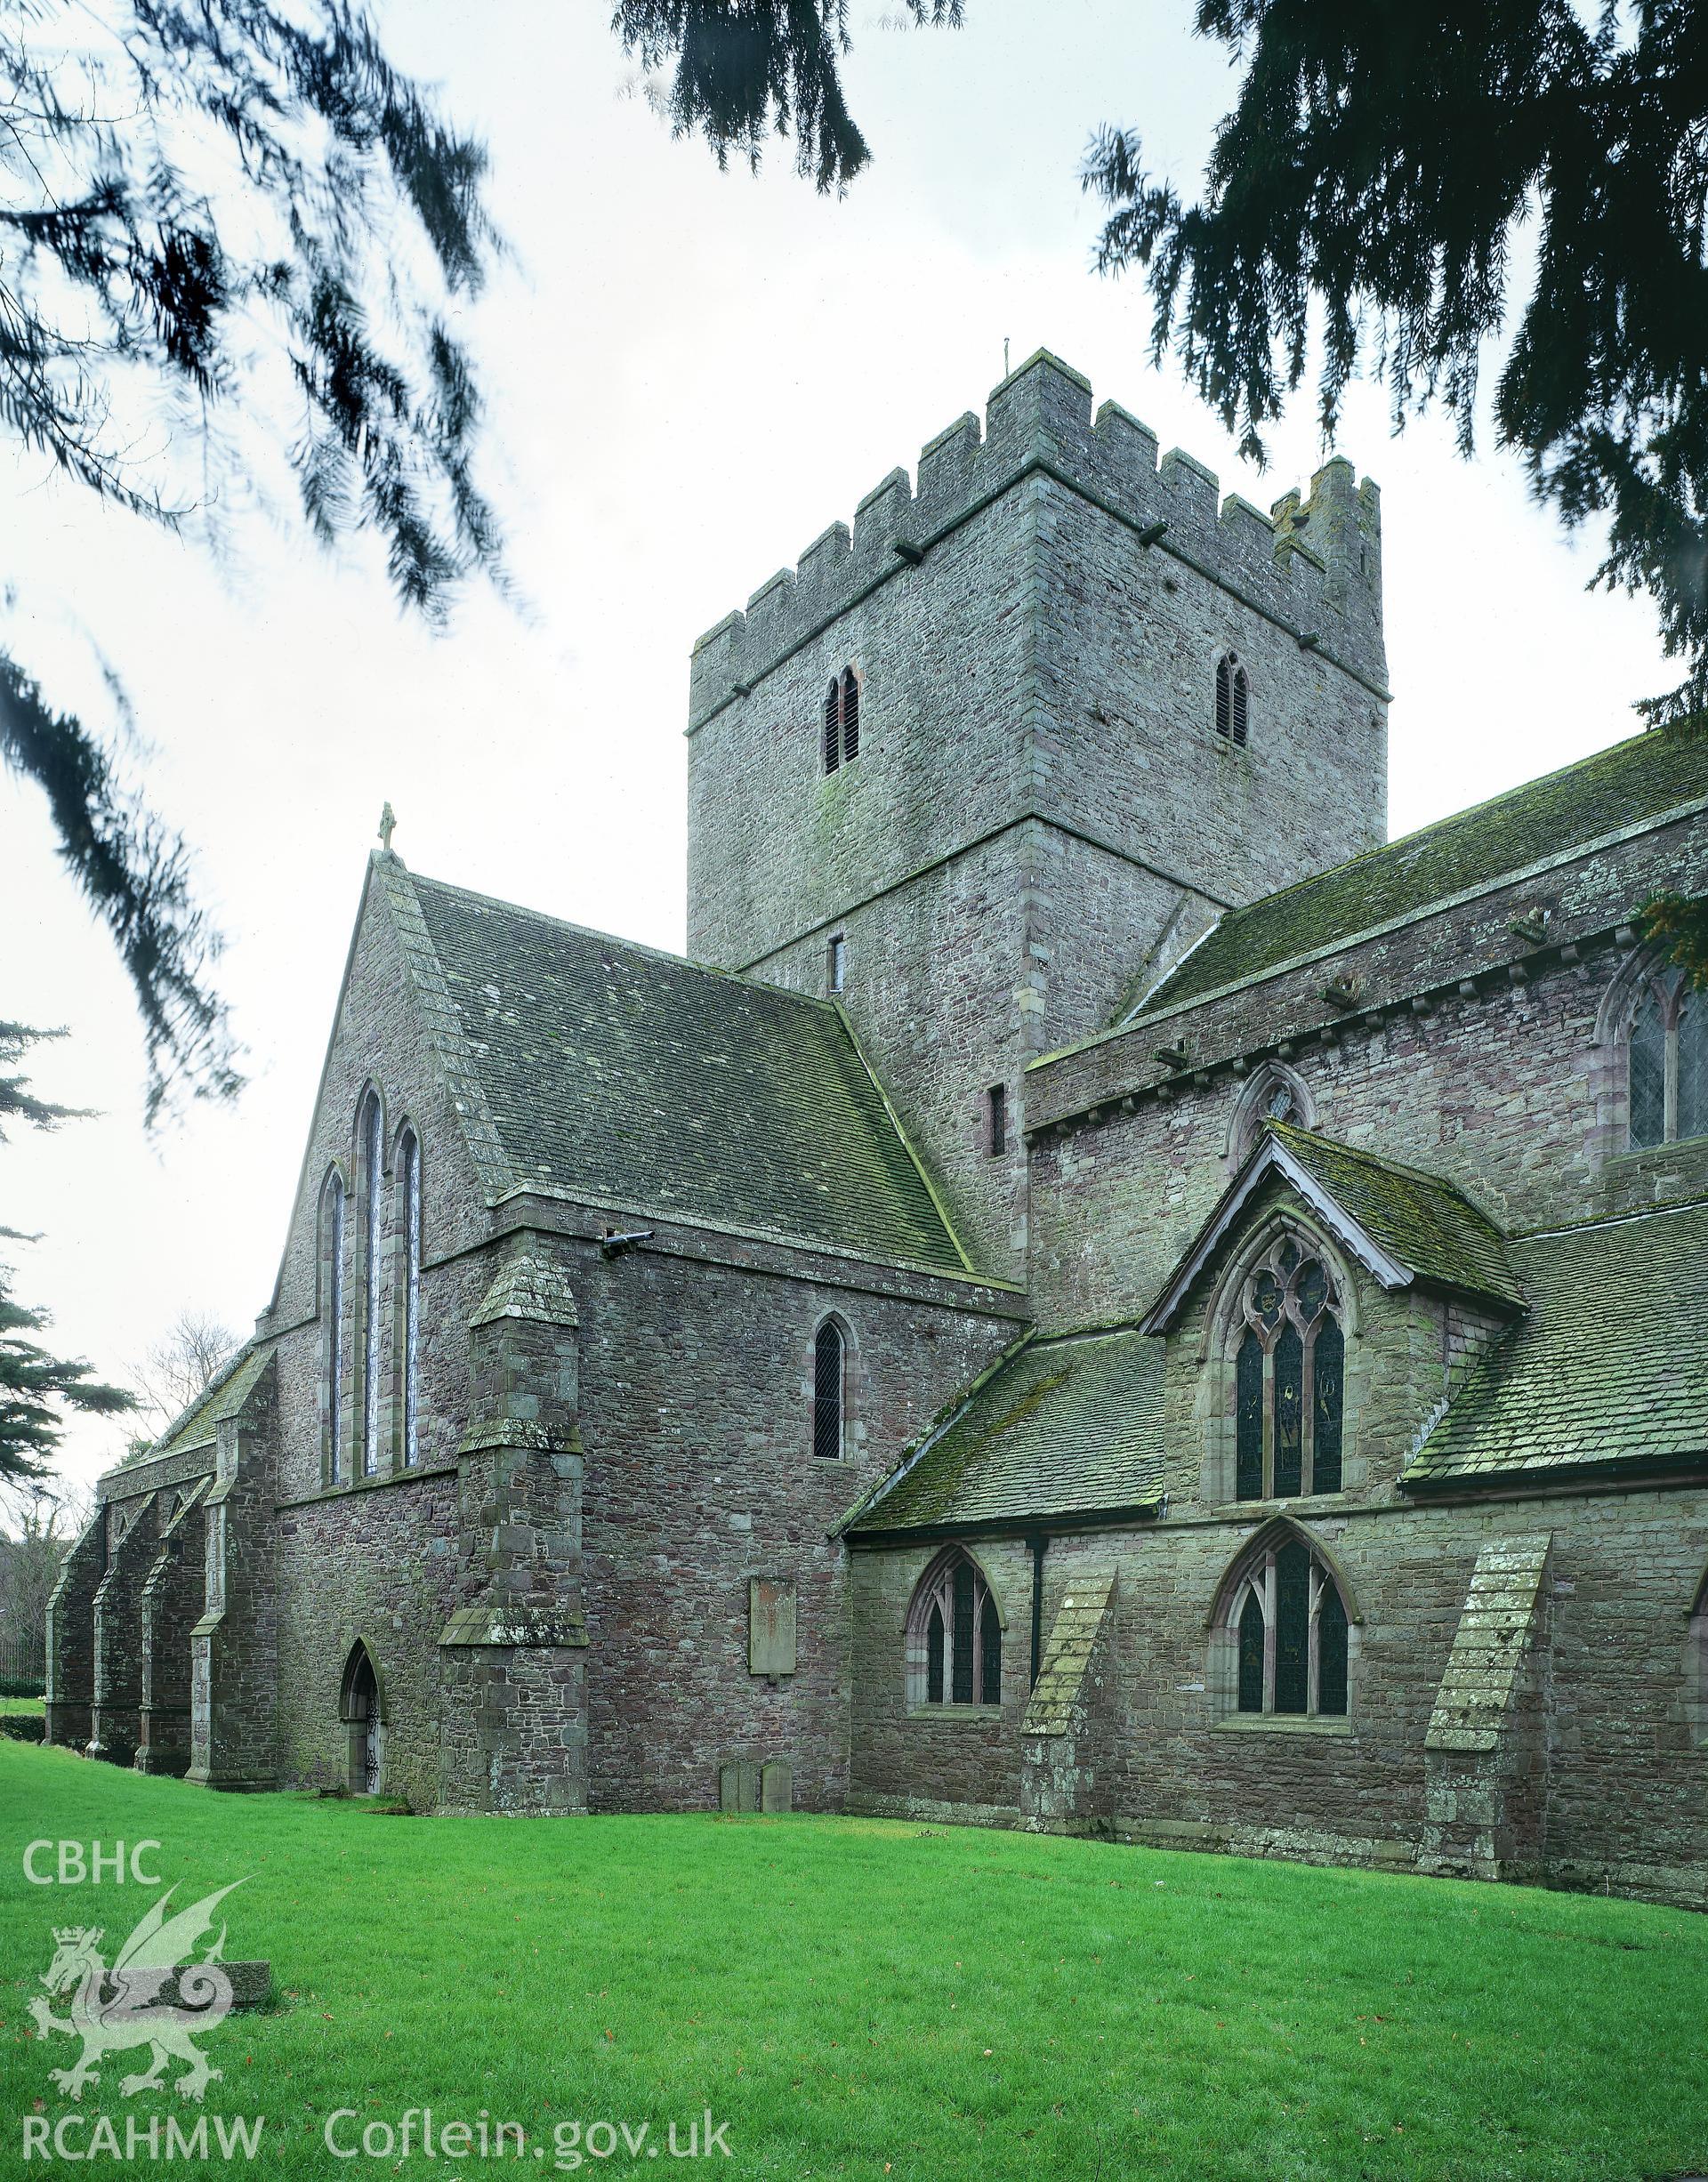 RCAHMW colour transparency of a general exterior view of Brecon Priory Church.